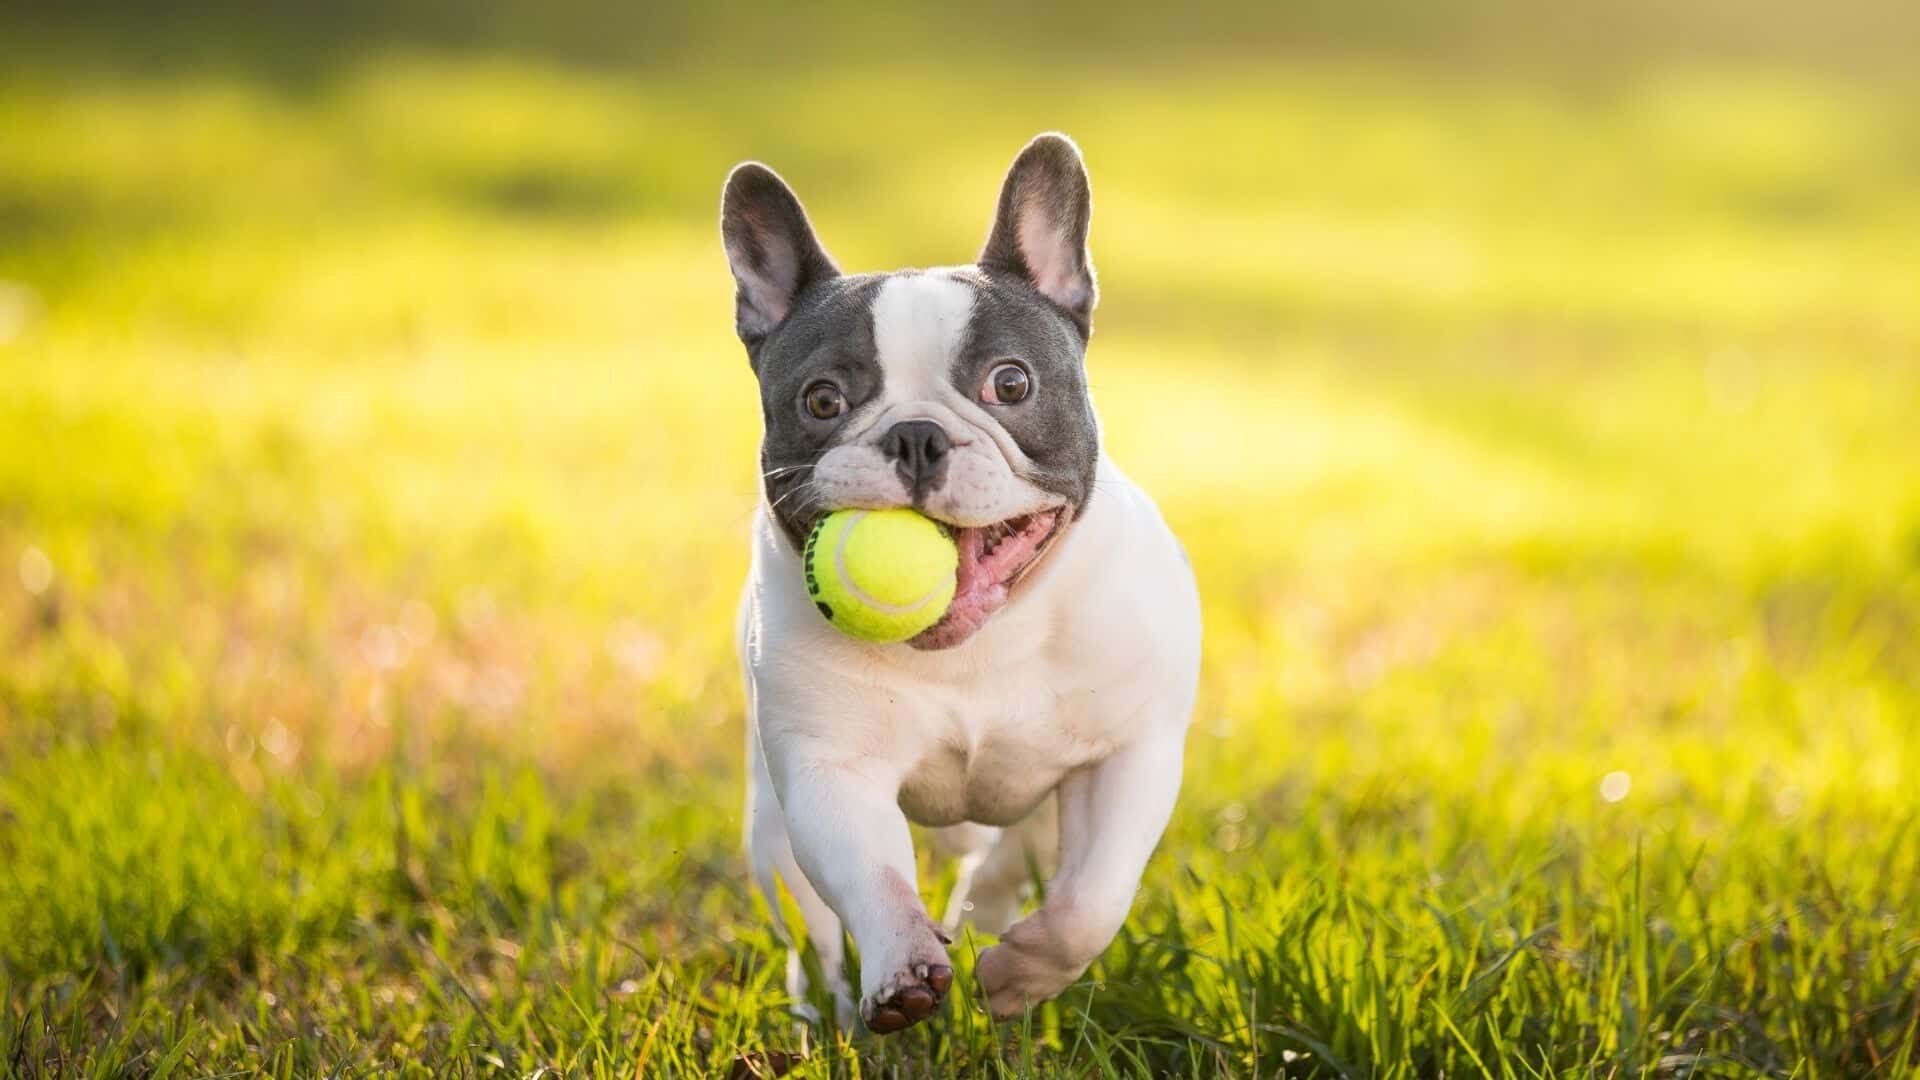 Why do dogs like balls?